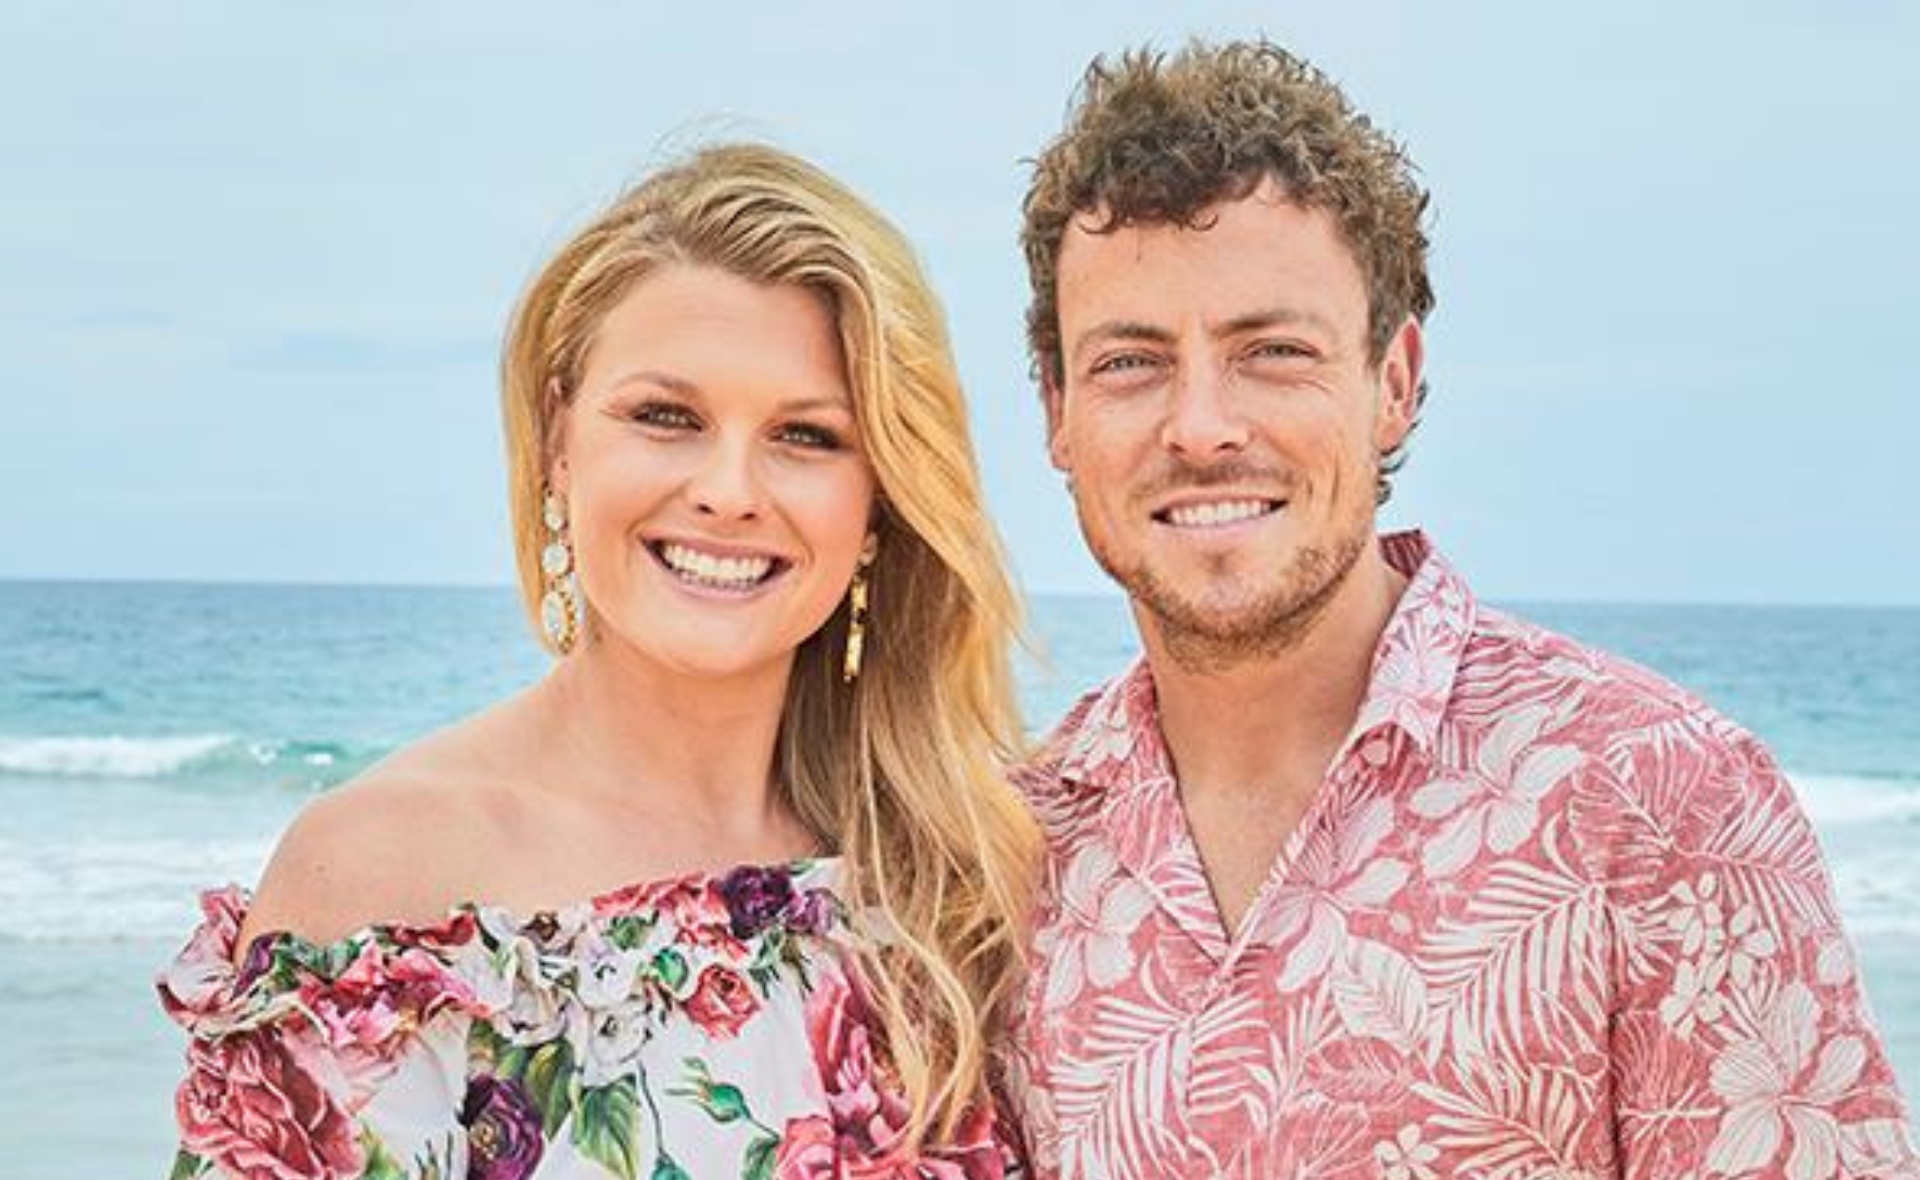 EXCLUSIVE: Home and Away sweethearts Sophie Dillman and Patrick O’Connor reveal how playing an on-screen couple has its challenges